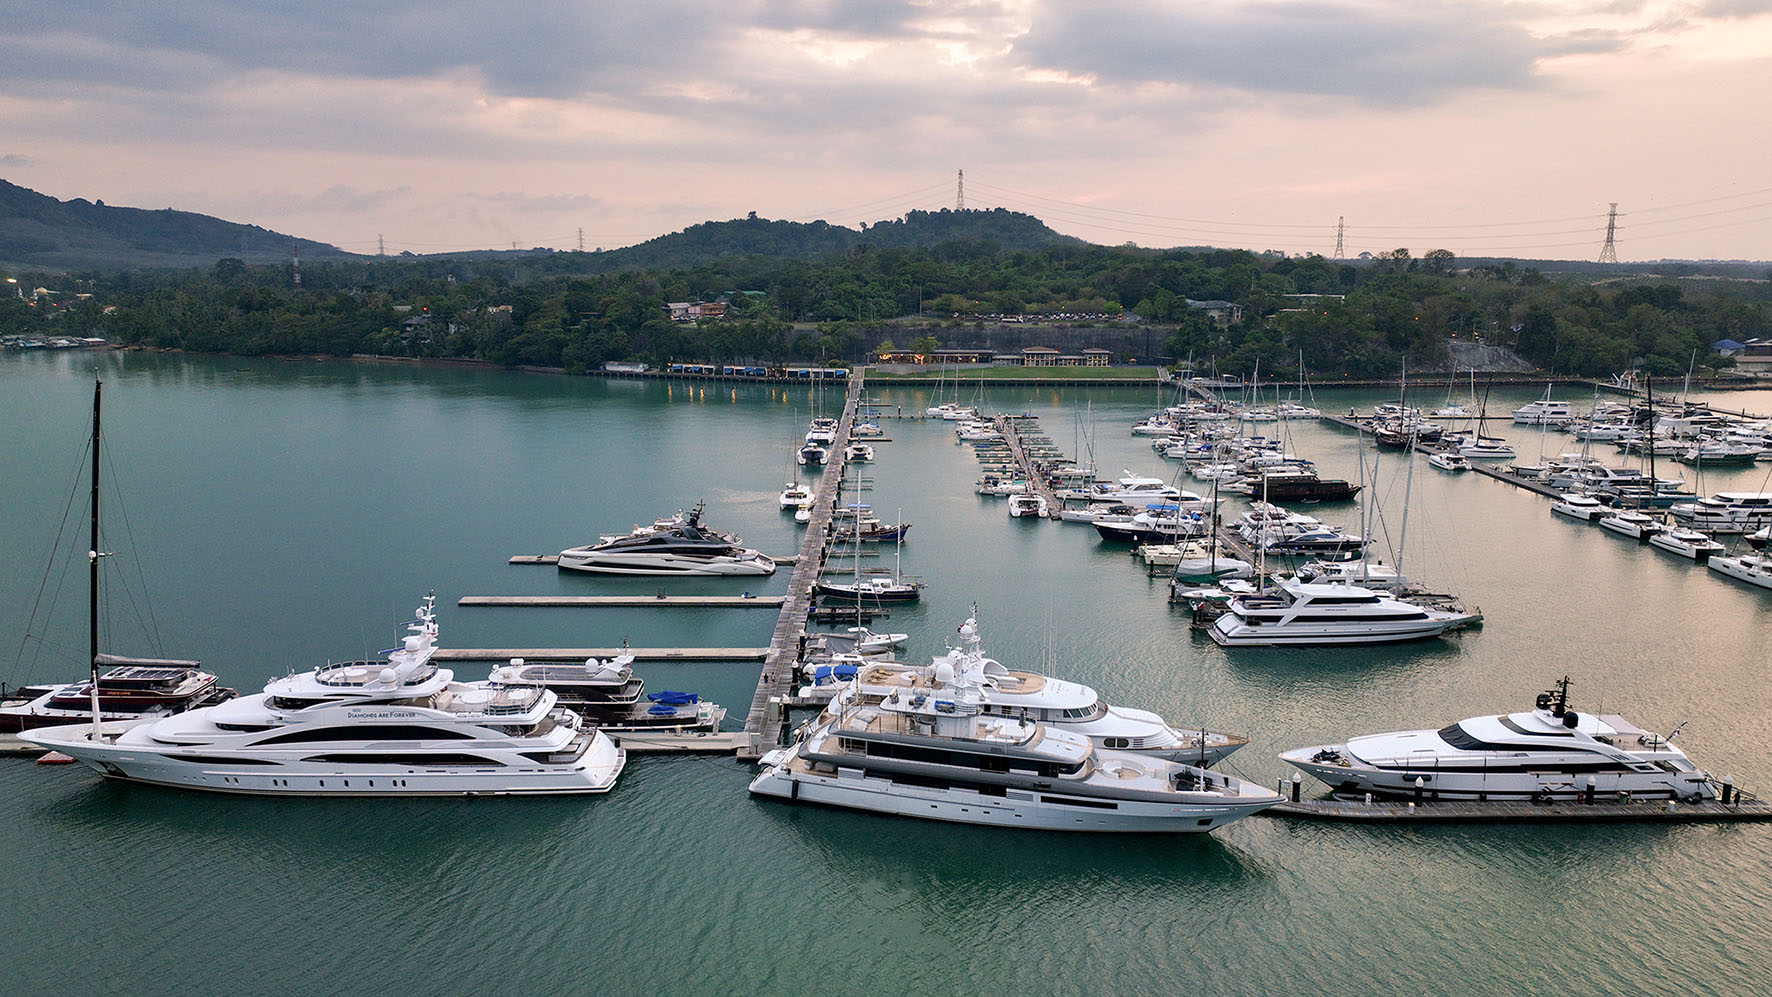 Thailand International Boat Show targets expansion with move to Phuket Yacht Haven in 2025